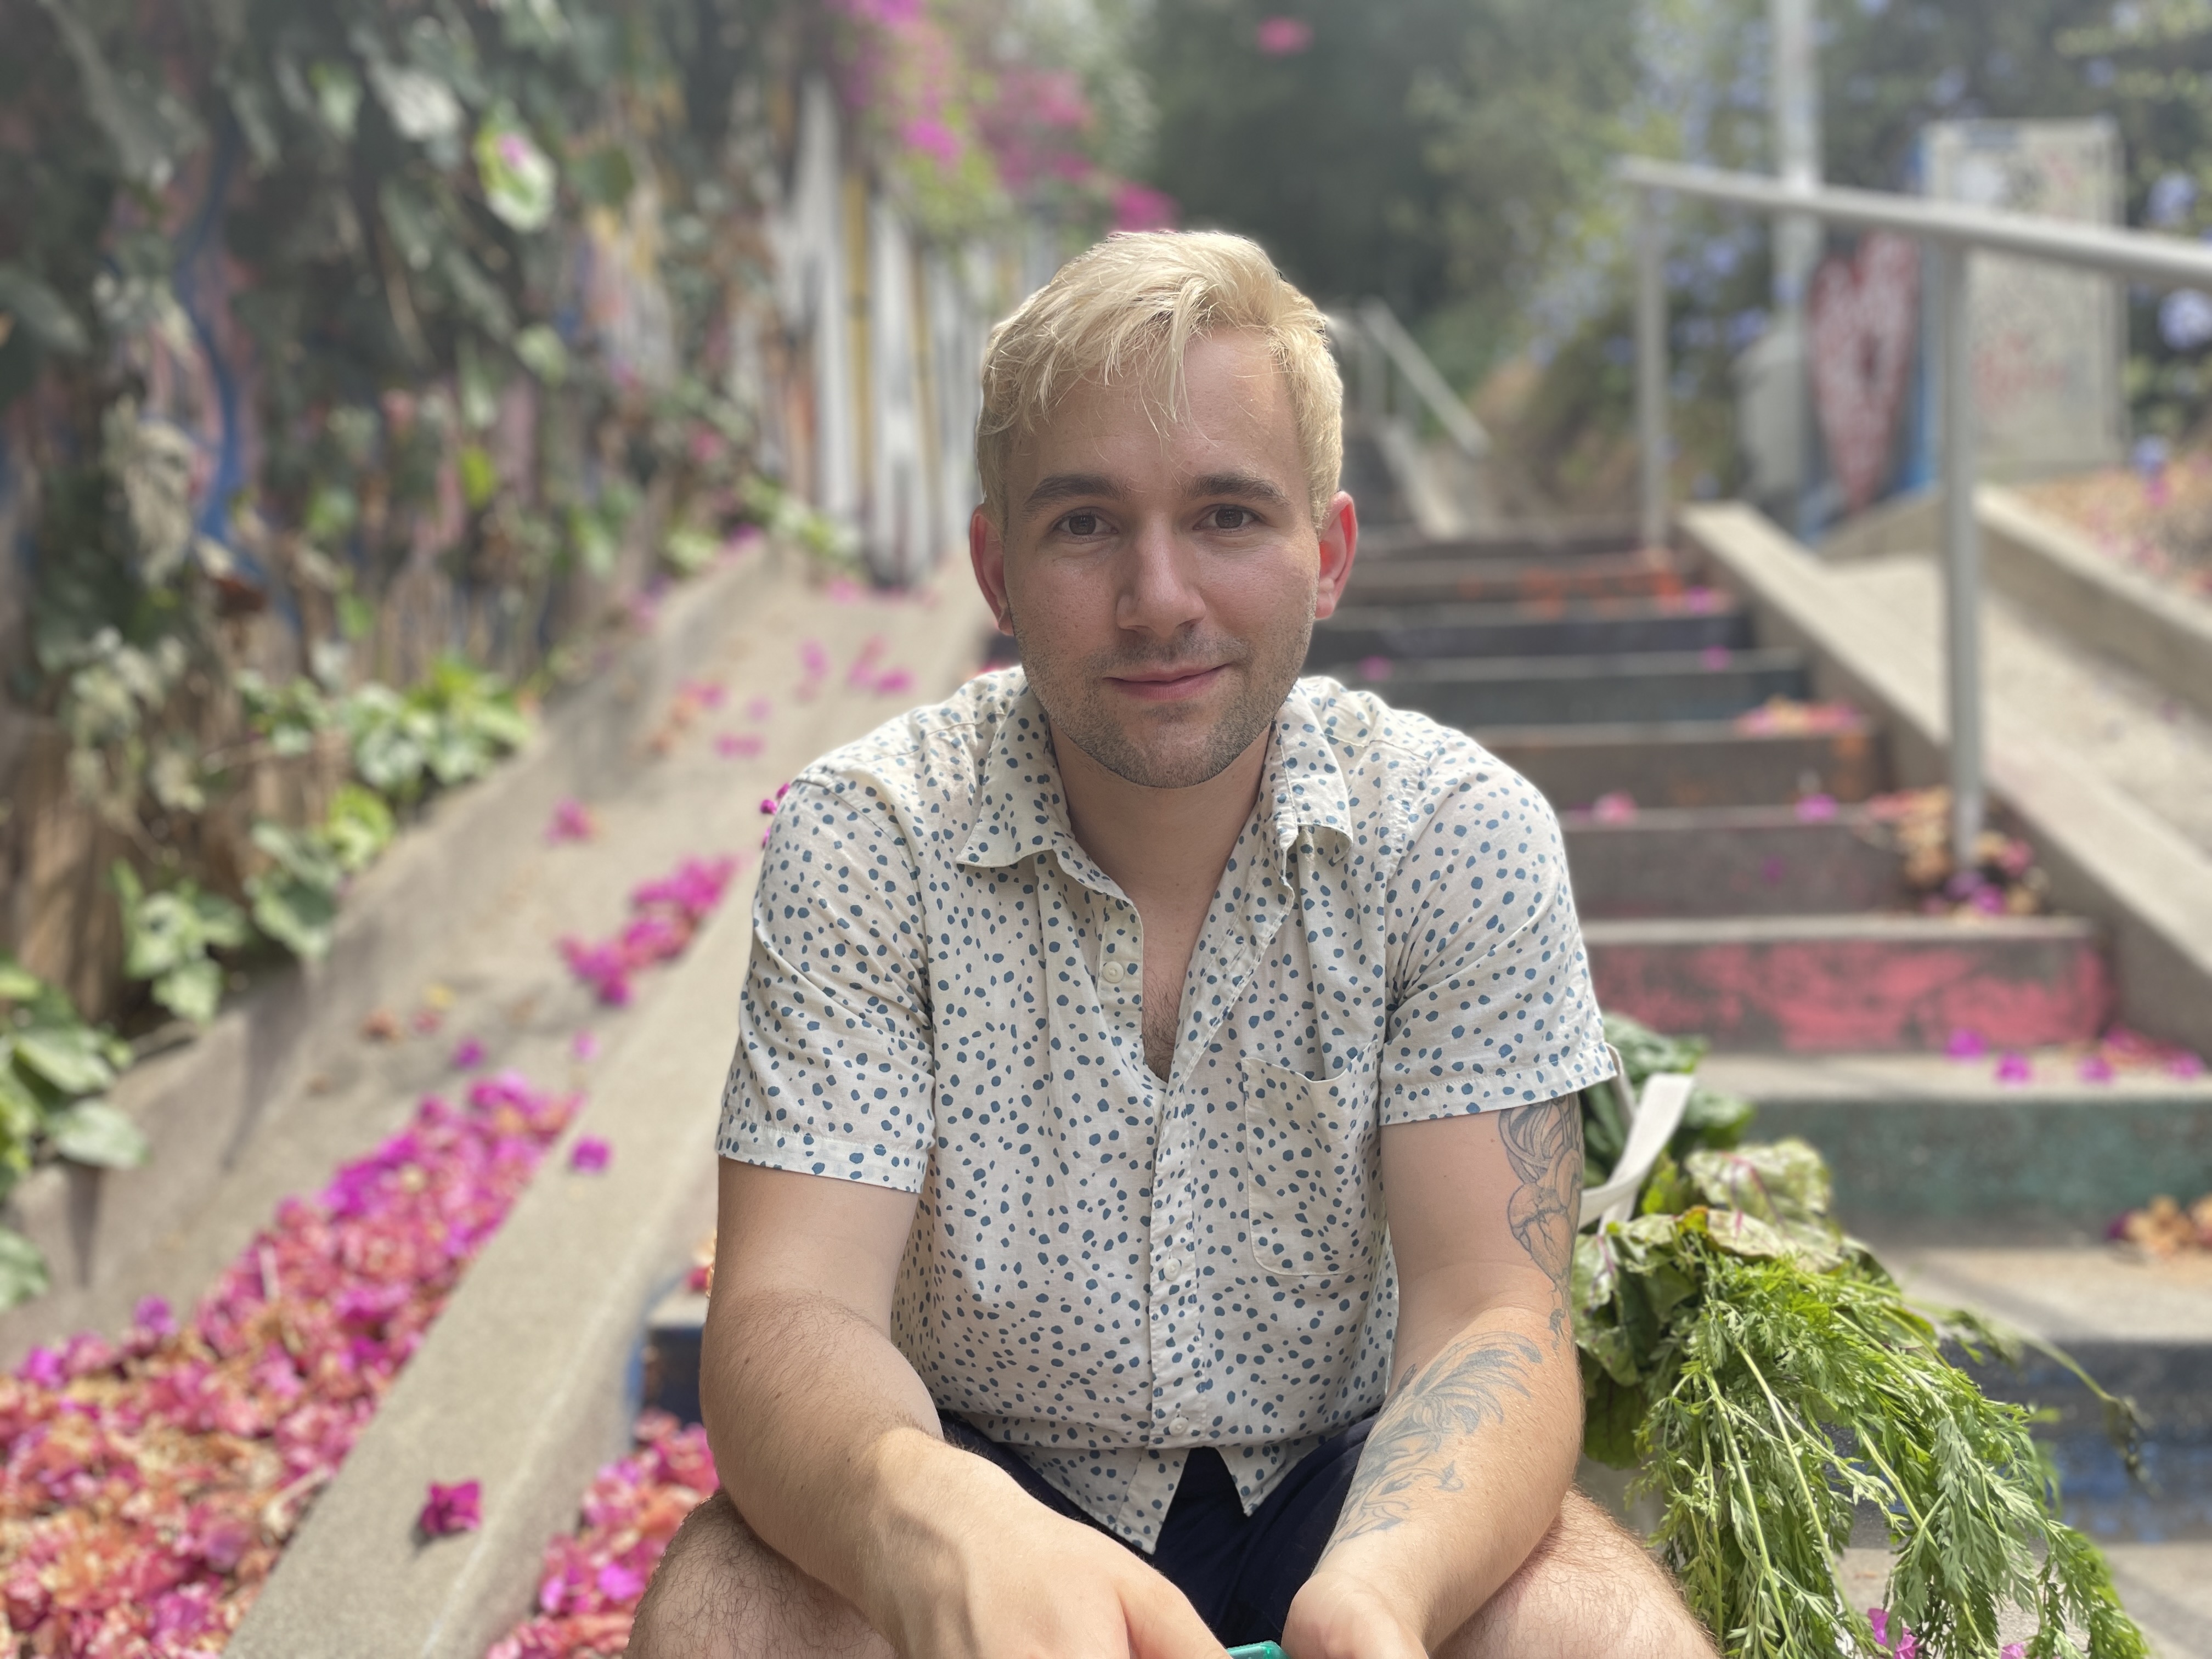 A white man in a short-sleeved blue and white collared shirt sits on cement steps with green ivy on the walls and pink petals on the ground in the background